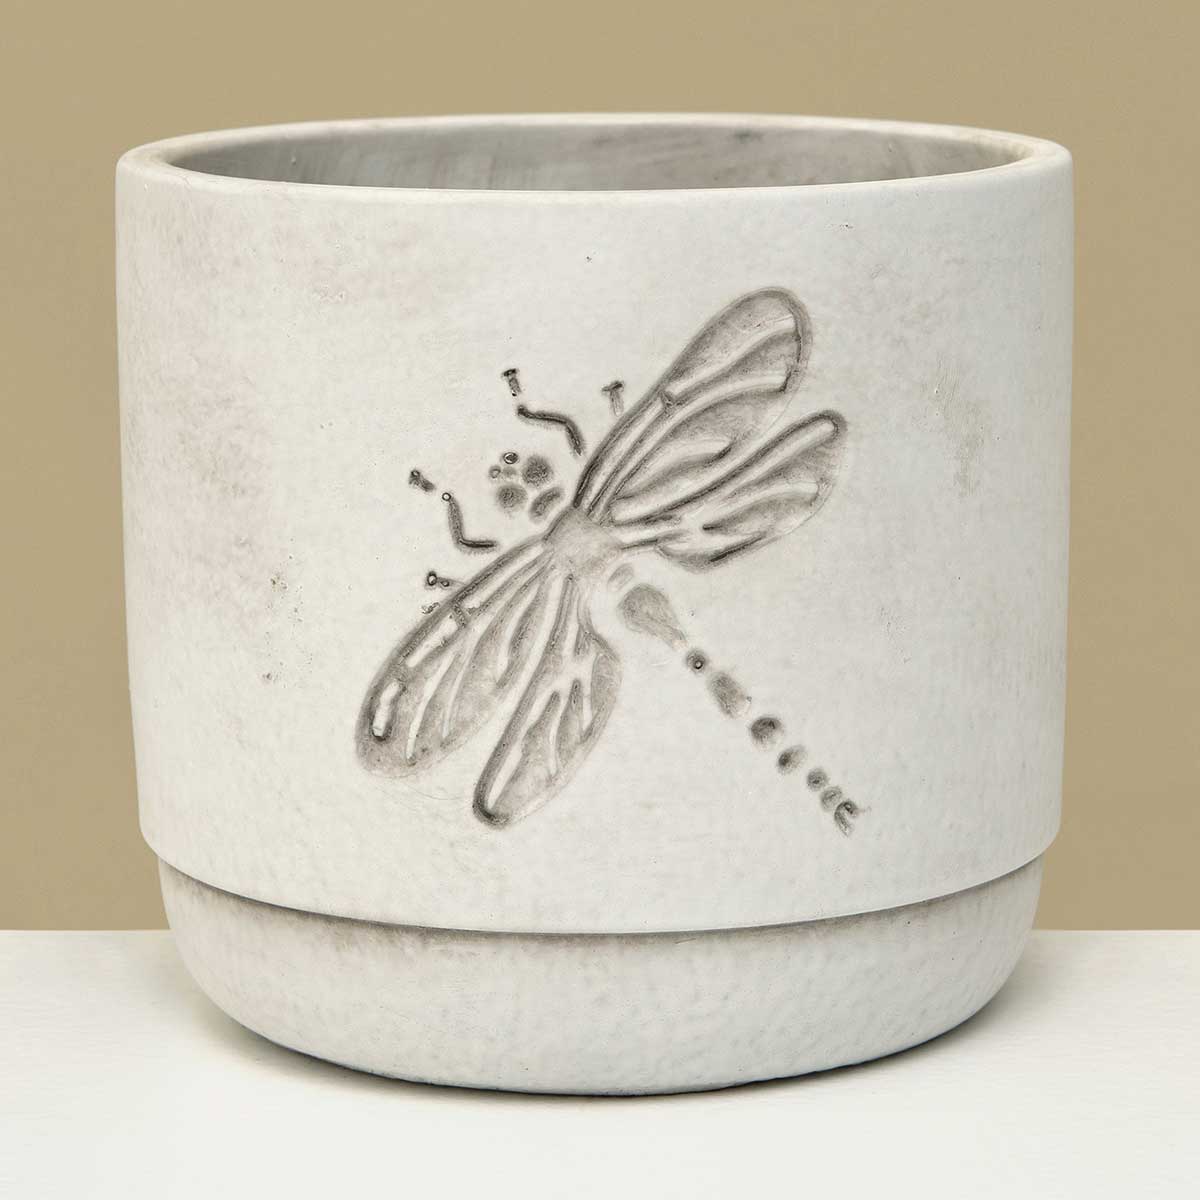 POT DRAGONFLY WHITE WASH LARGE 5.5IN X 5IN CONCRETE